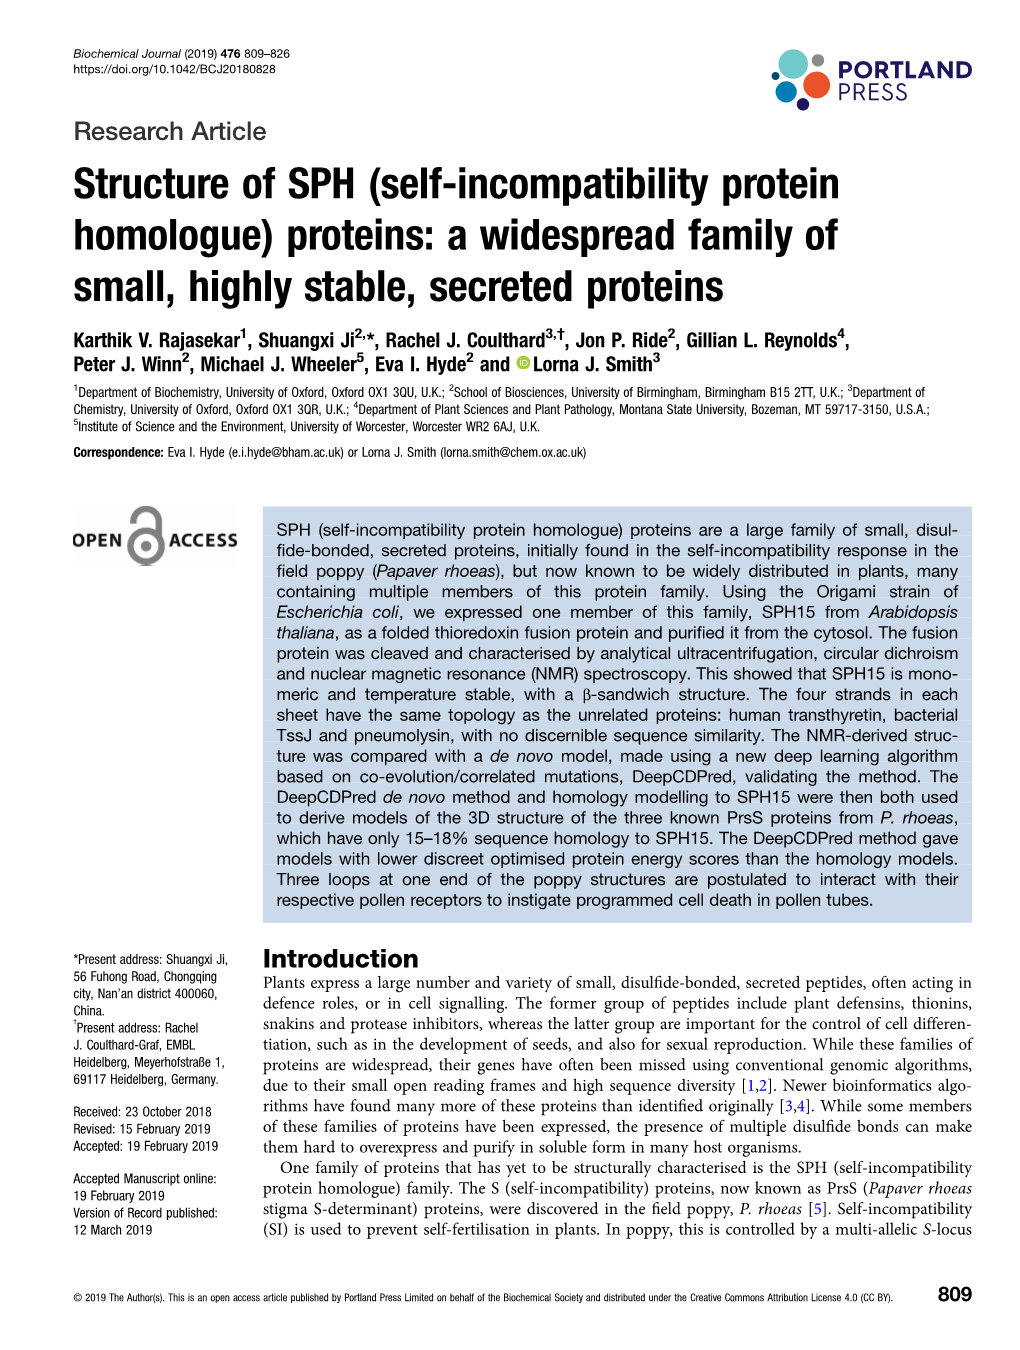 Structure of SPH (Self-Incompatibility Protein Homologue) Proteins: a Widespread Family of Small, Highly Stable, Secreted Proteins